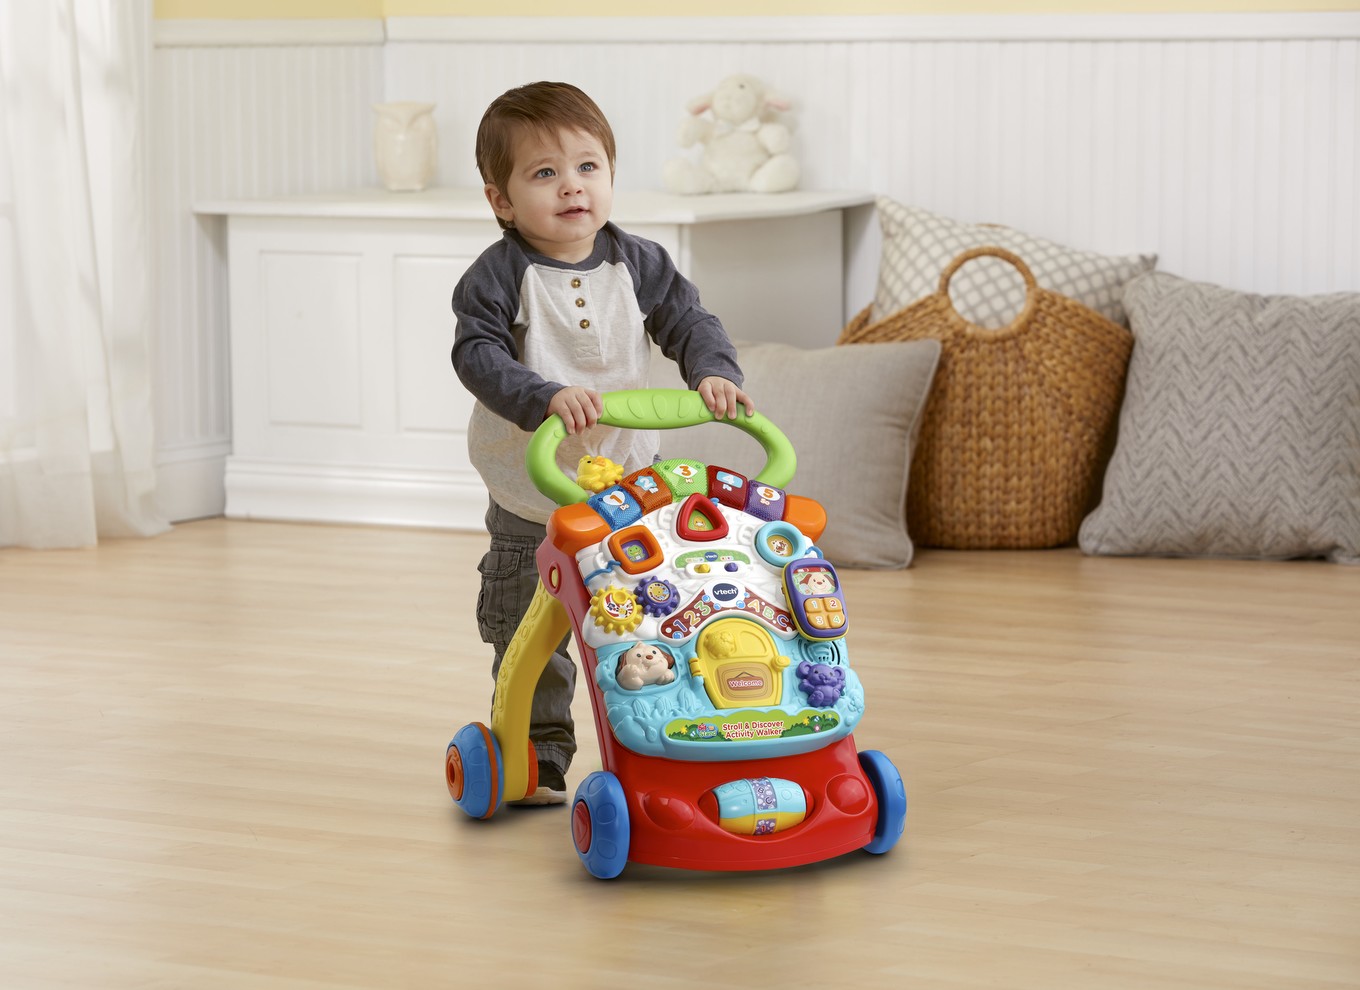 activity walkers for toddlers